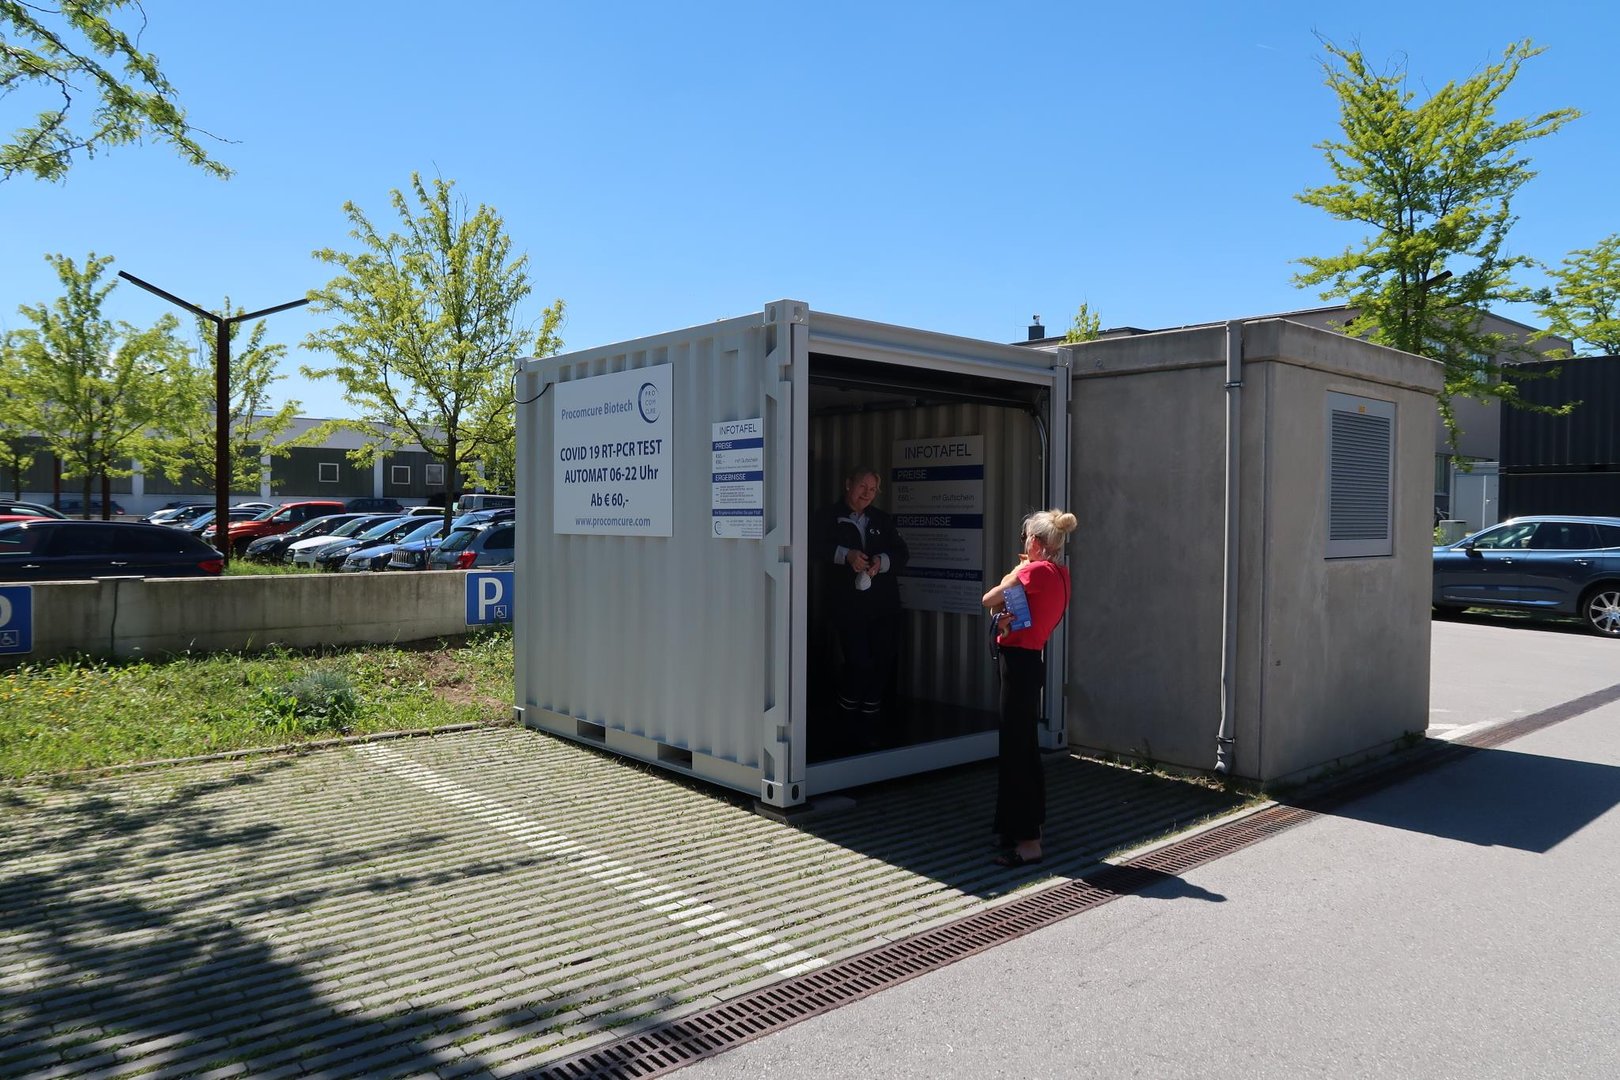 Space-saving self-service storage container in Salzburg (AT